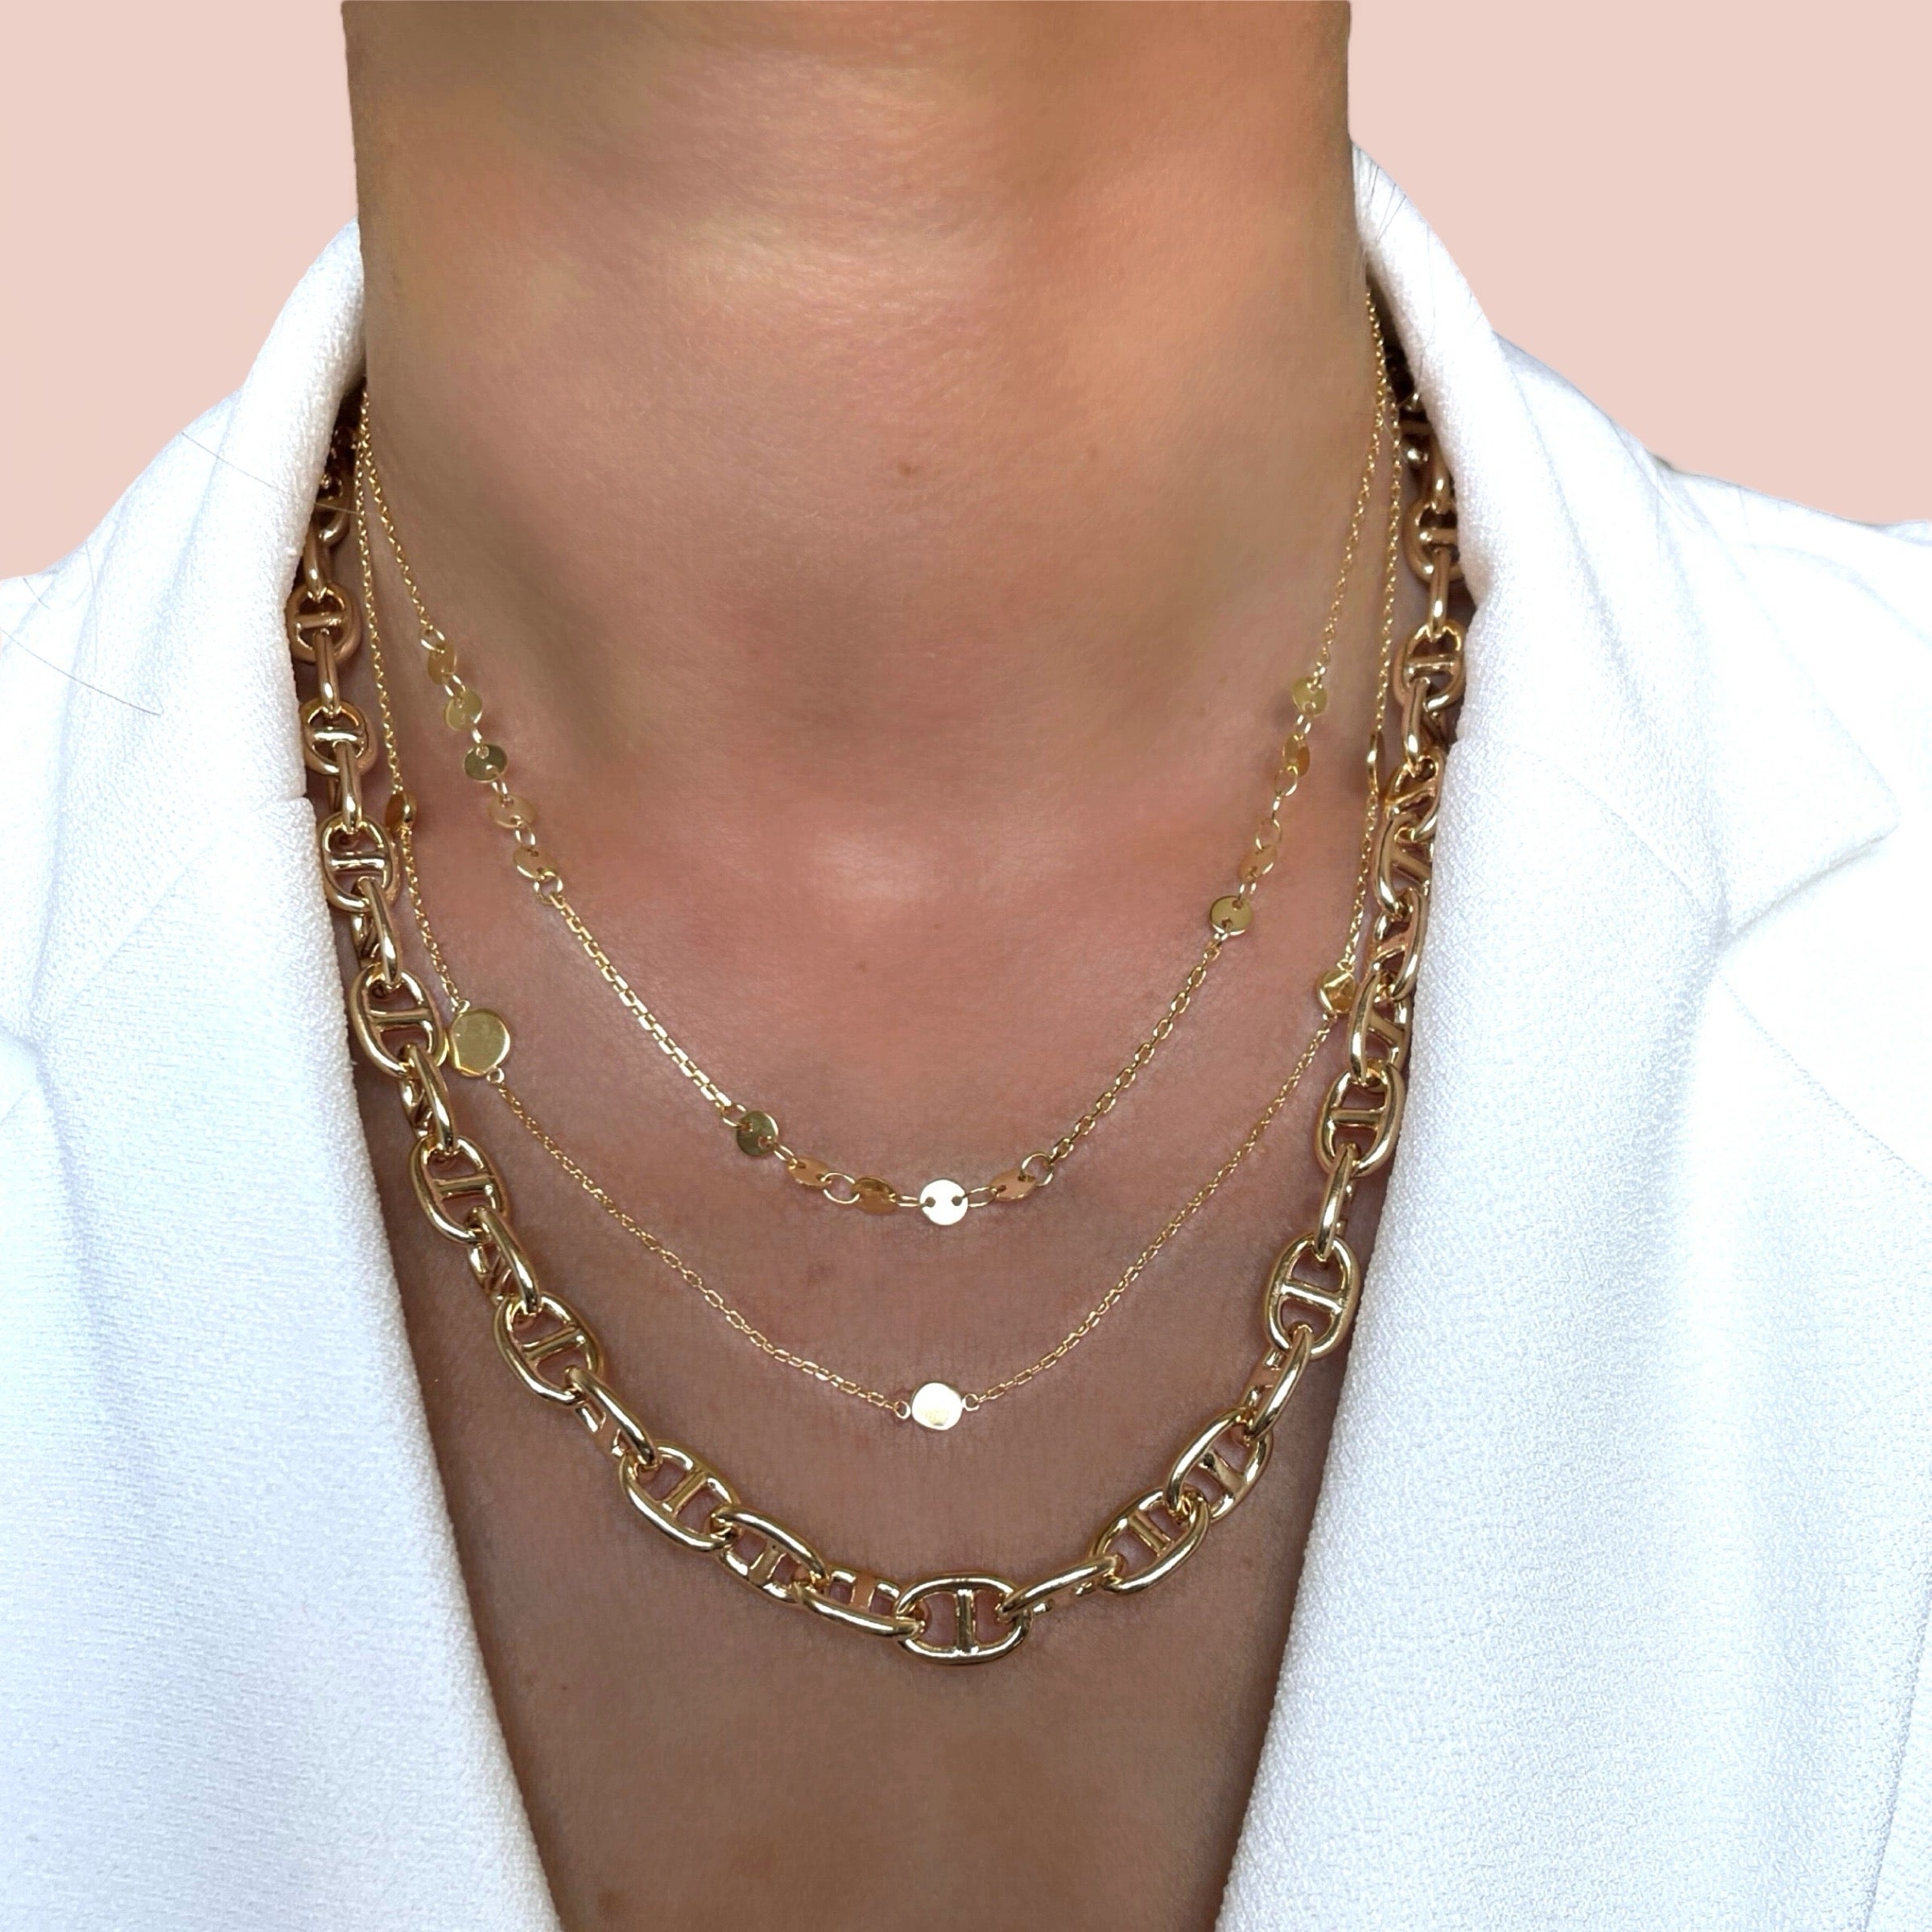 Gold-plated “Confetti” necklace